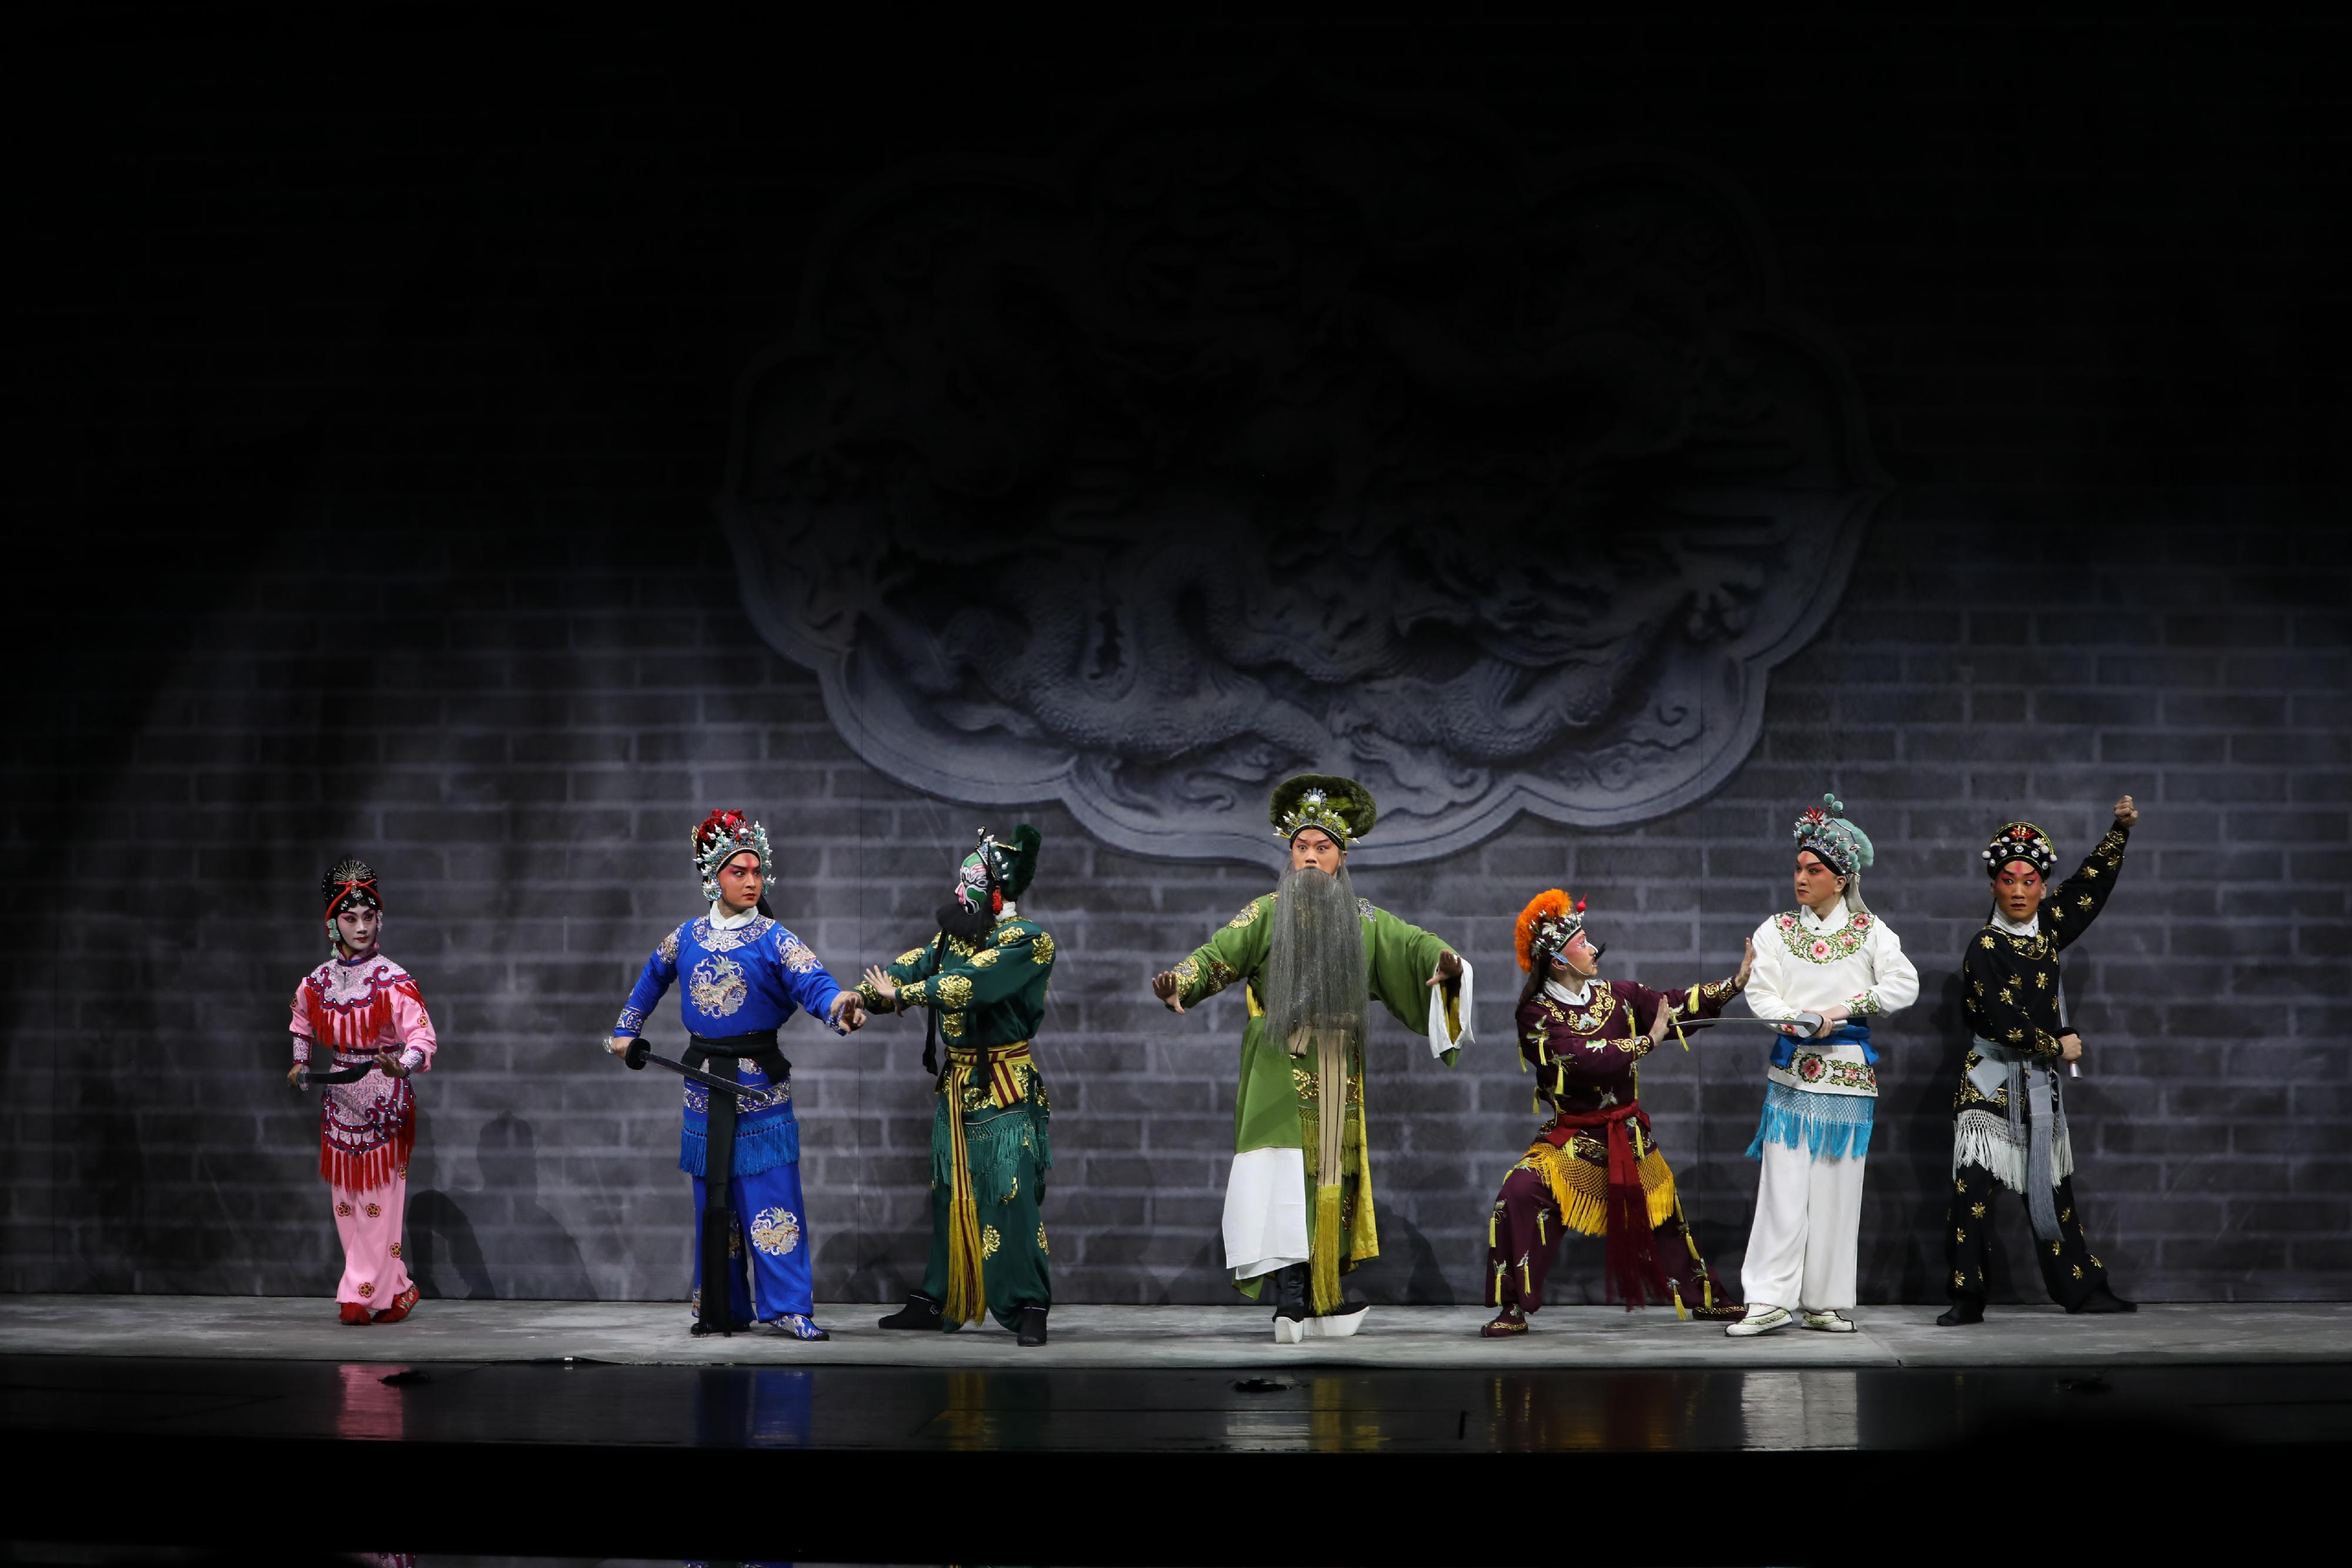 The Leisure and Cultural Services Department will present eight quality programmes at this year's Chinese Opera Festival from June to August. Photo shows a scene from the Peking opera performance "Seven Heroes and Five Gallants".